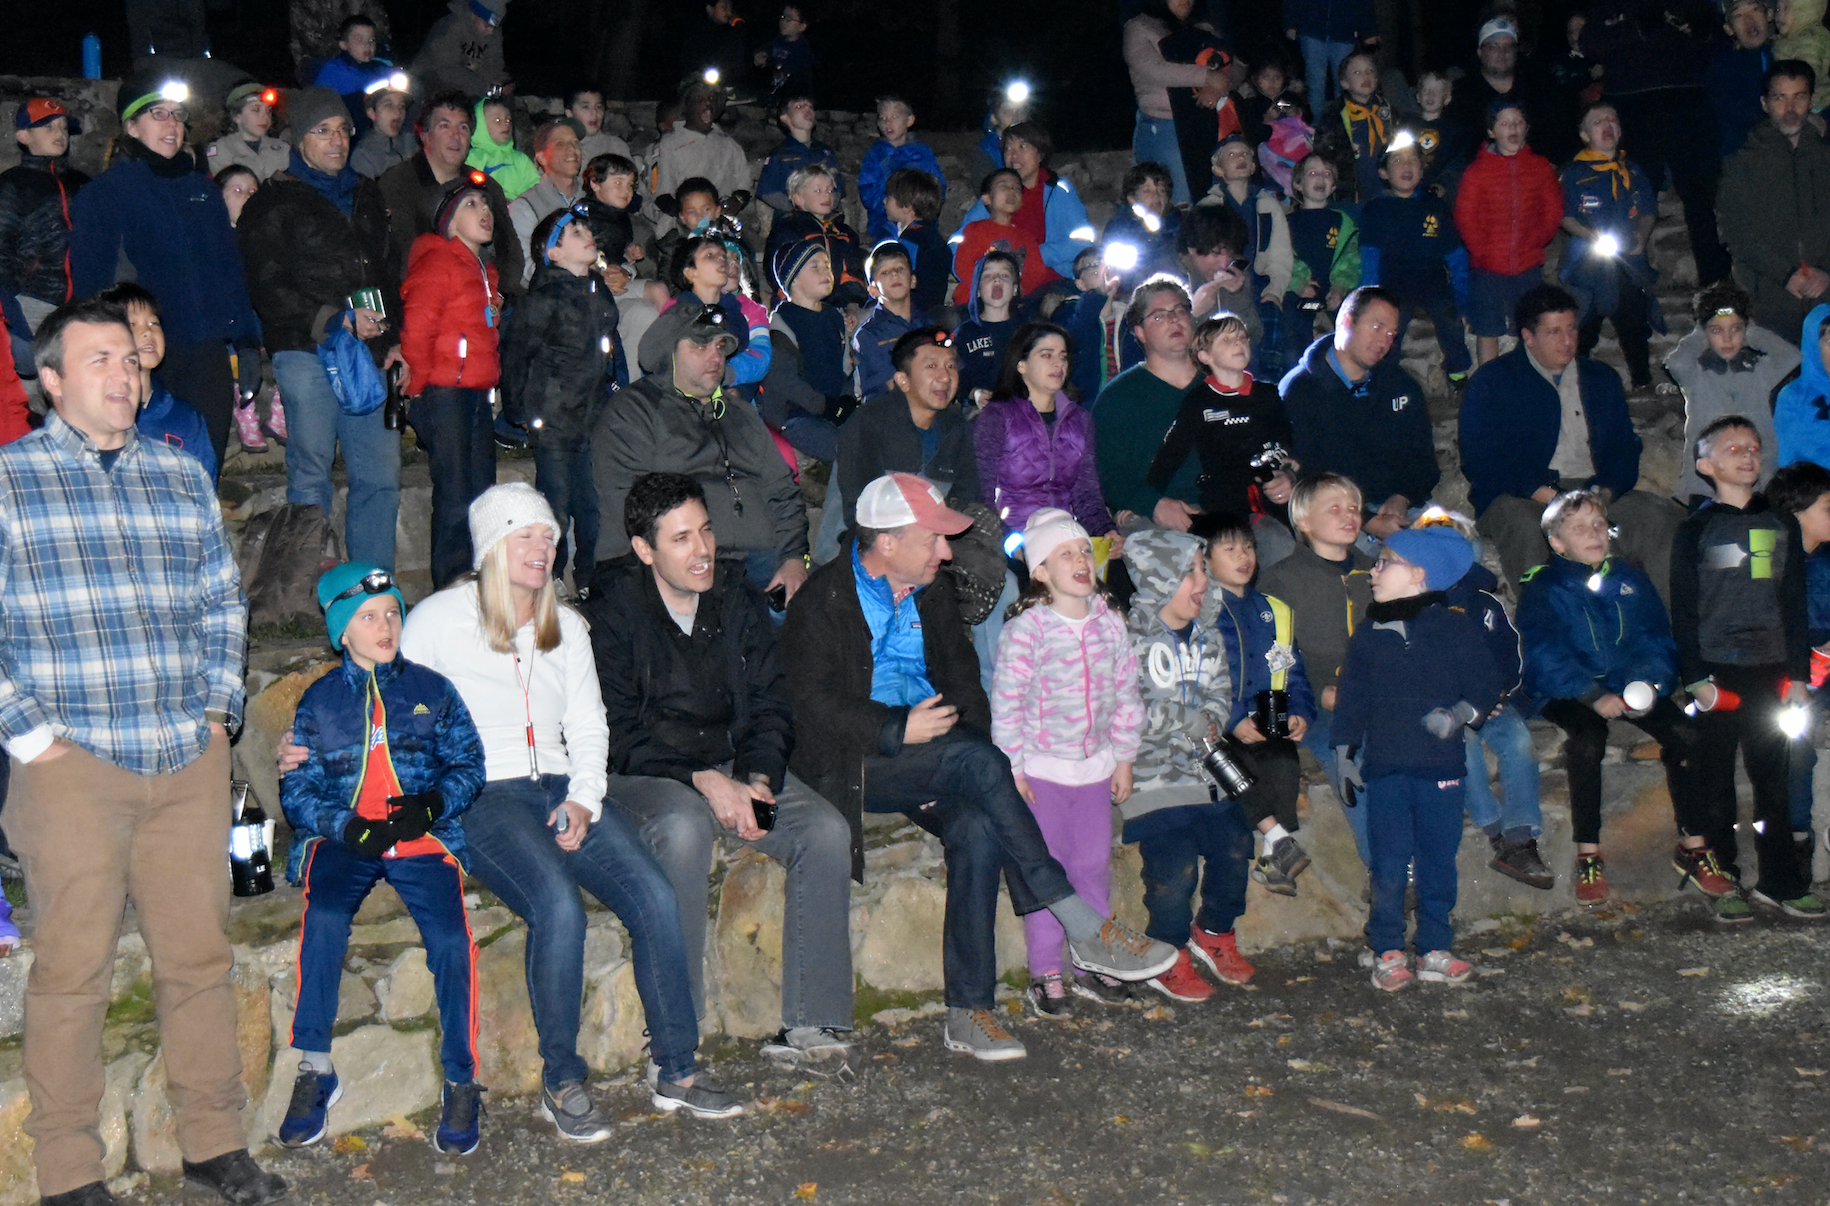 Cub Scouts and their families gather for campfire skits at the outdoor amphitheater at Greenwich Scouting's Fall Festival at Seton Scout Reservation.